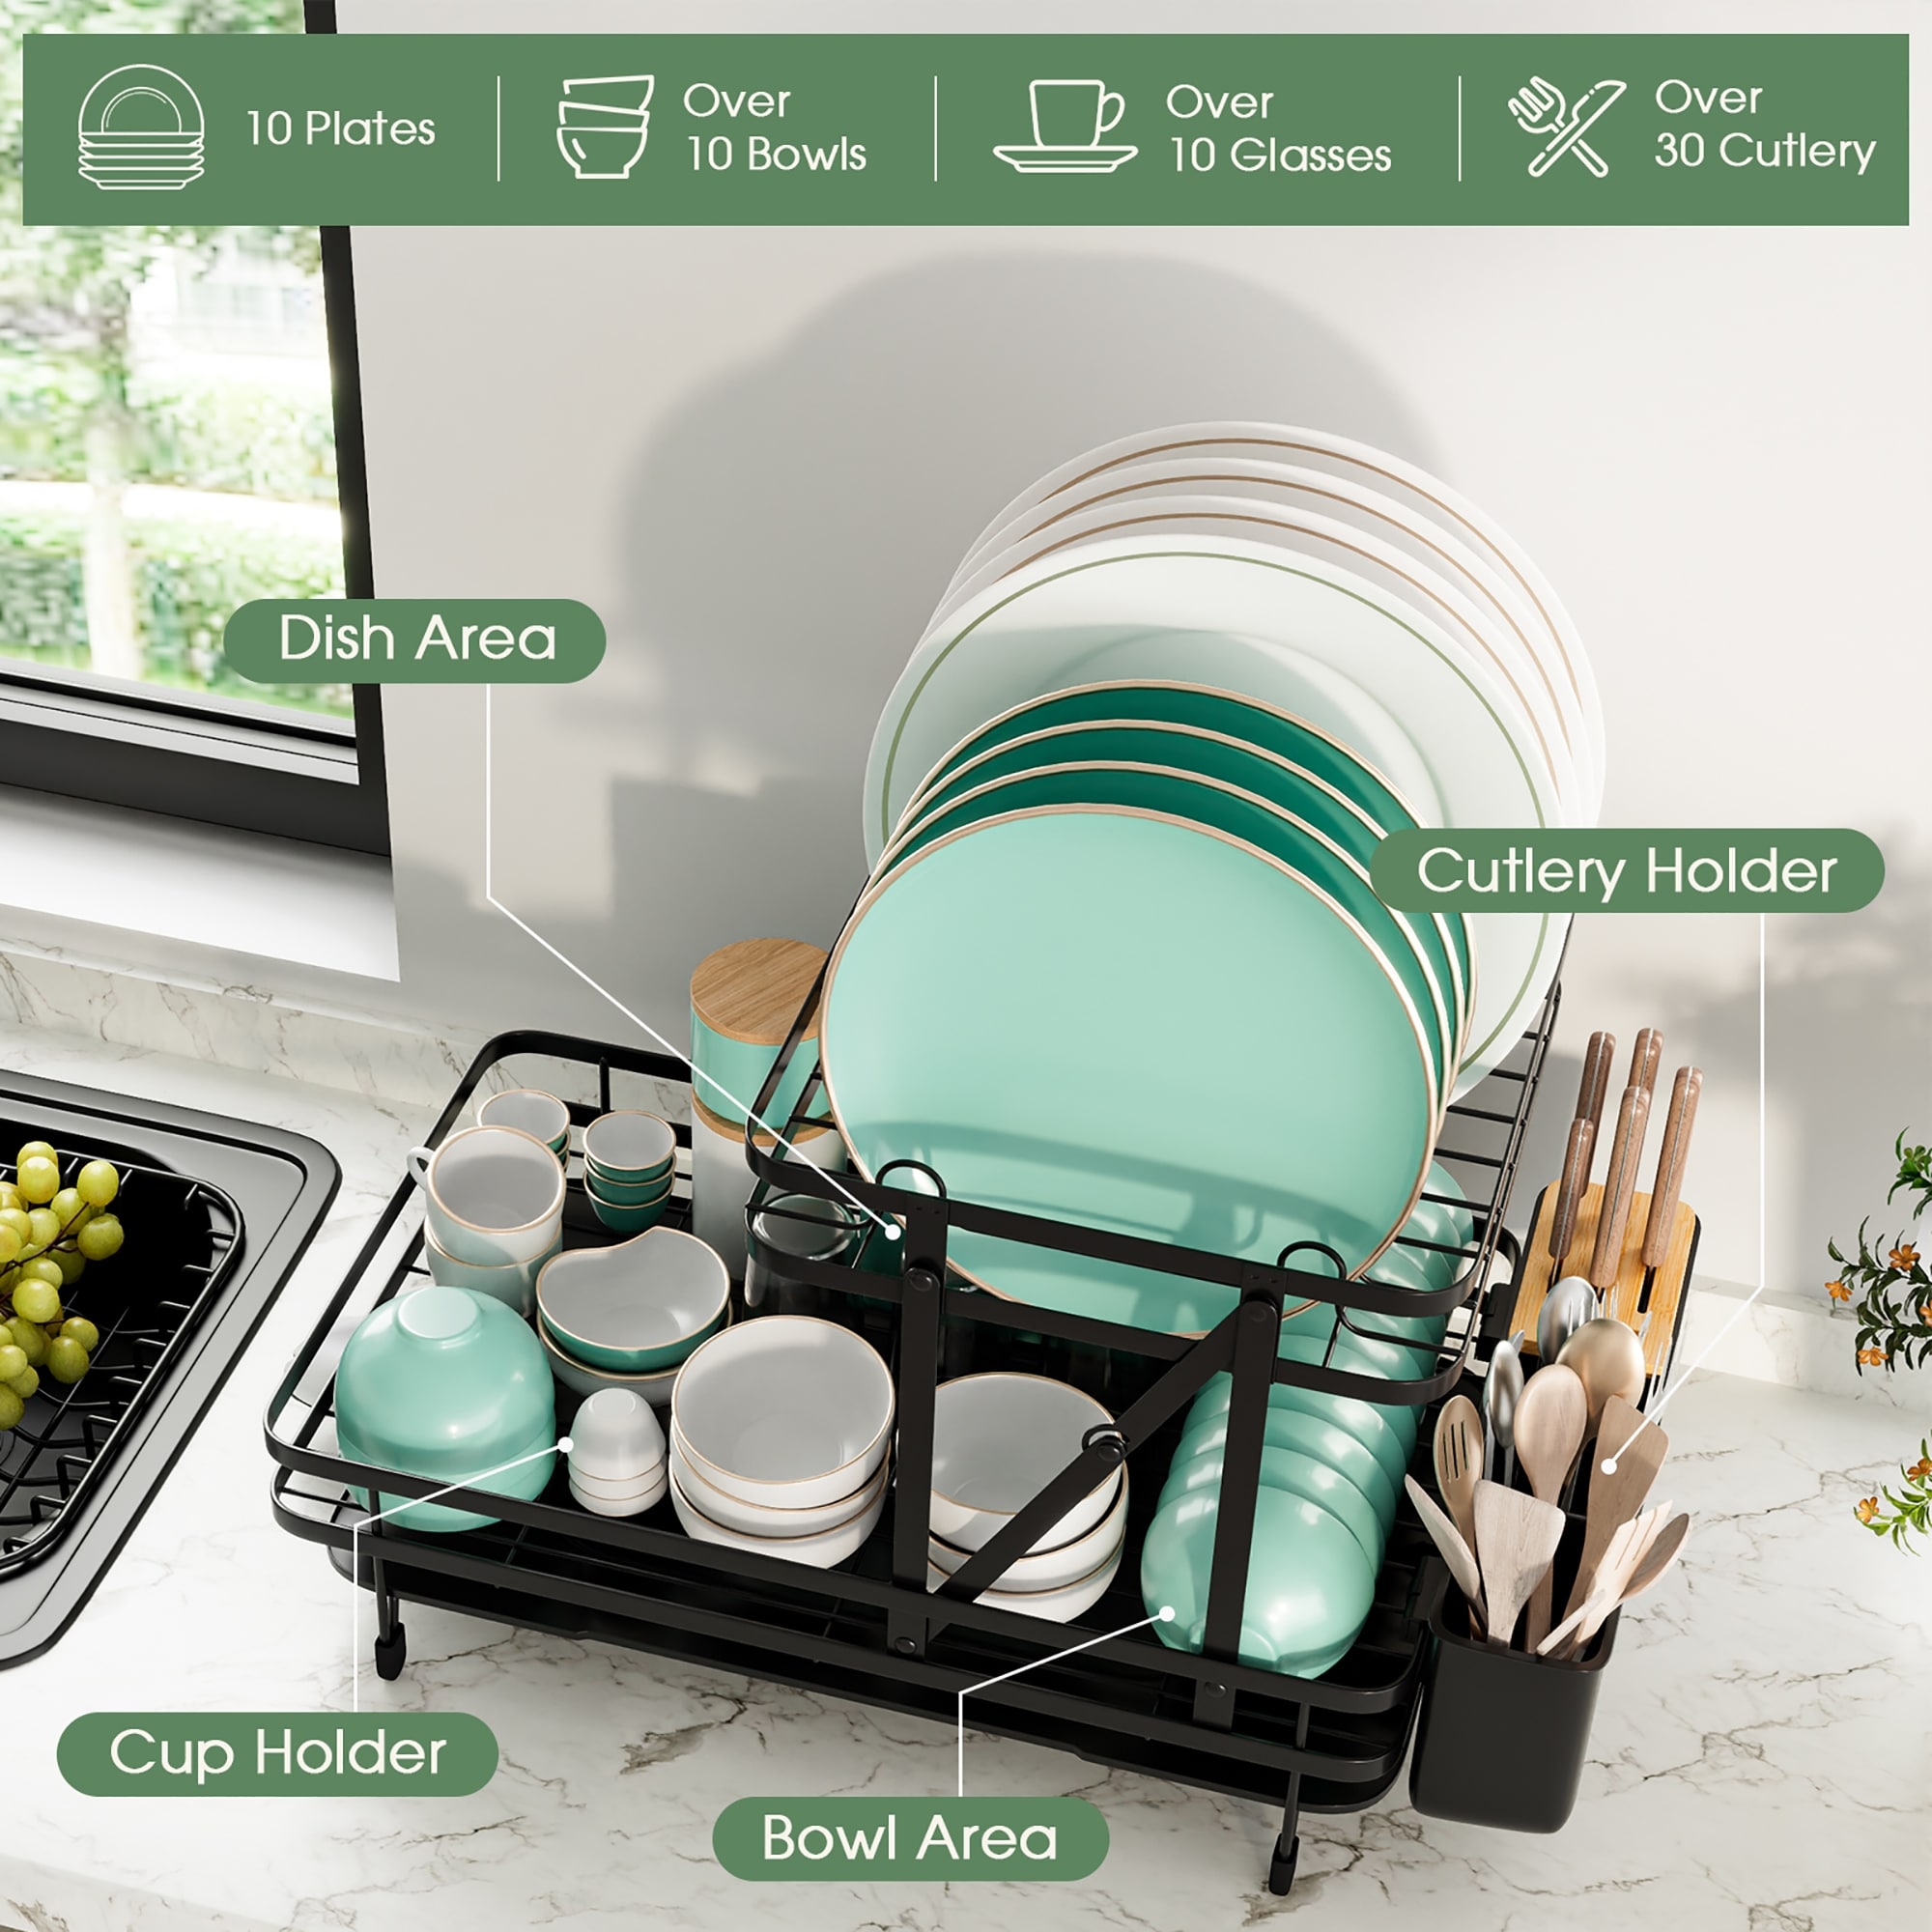 https://ak1.ostkcdn.com/images/products/is/images/direct/6bdd6a731f9710c3e6f67575a84f14d43d2374de/Costway-Dish-Drying-Rack-Collapsible-2-Tier-Dish-Rack-and-Drainboard.jpg